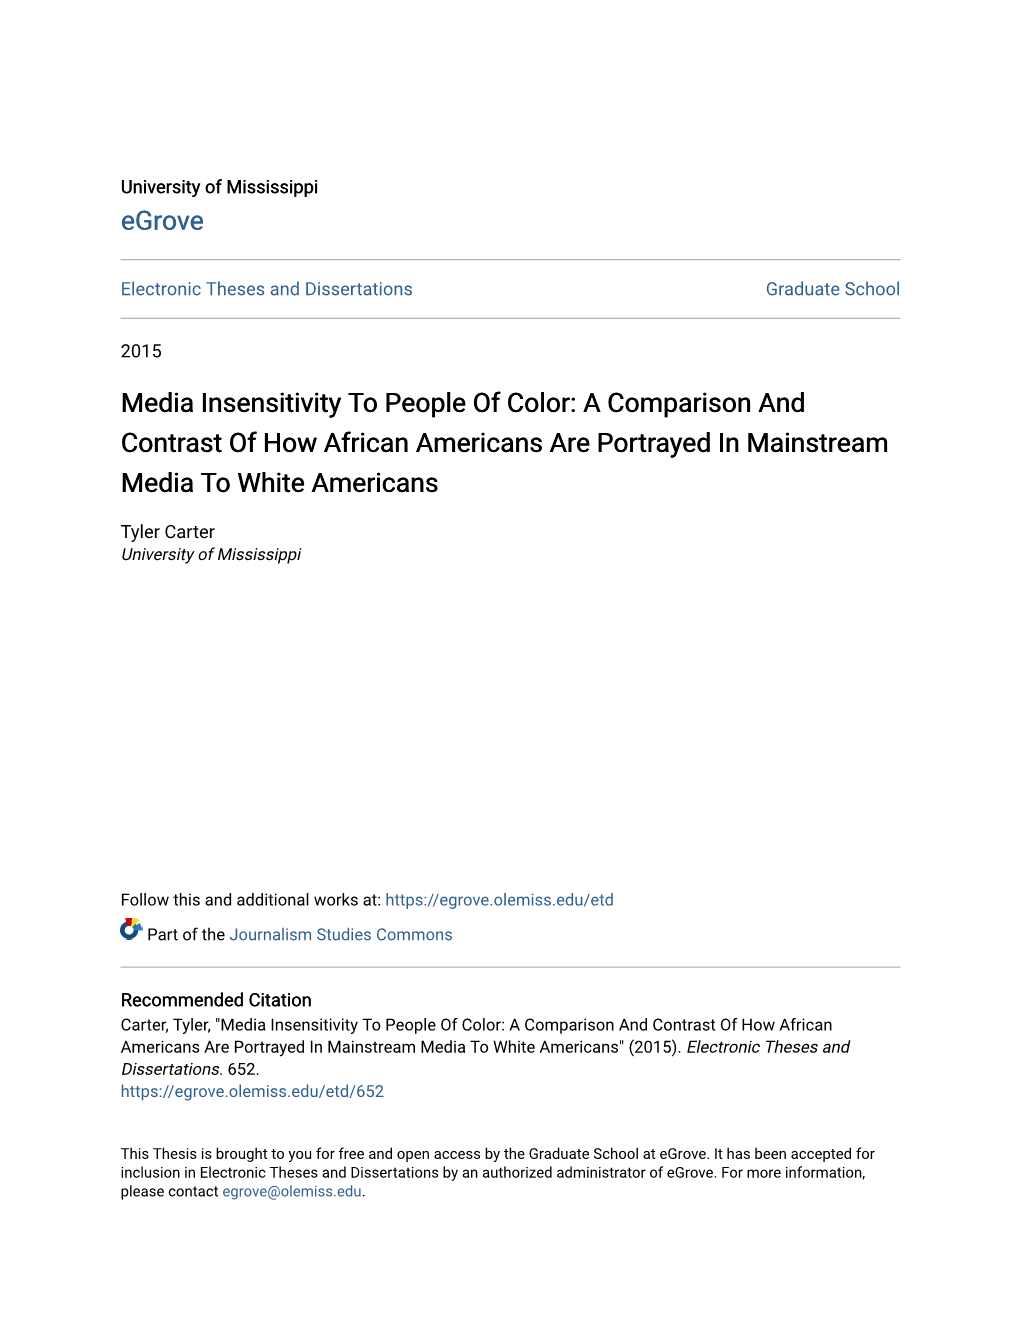 A Comparison and Contrast of How African Americans Are Portrayed in Mainstream Media to White Americans